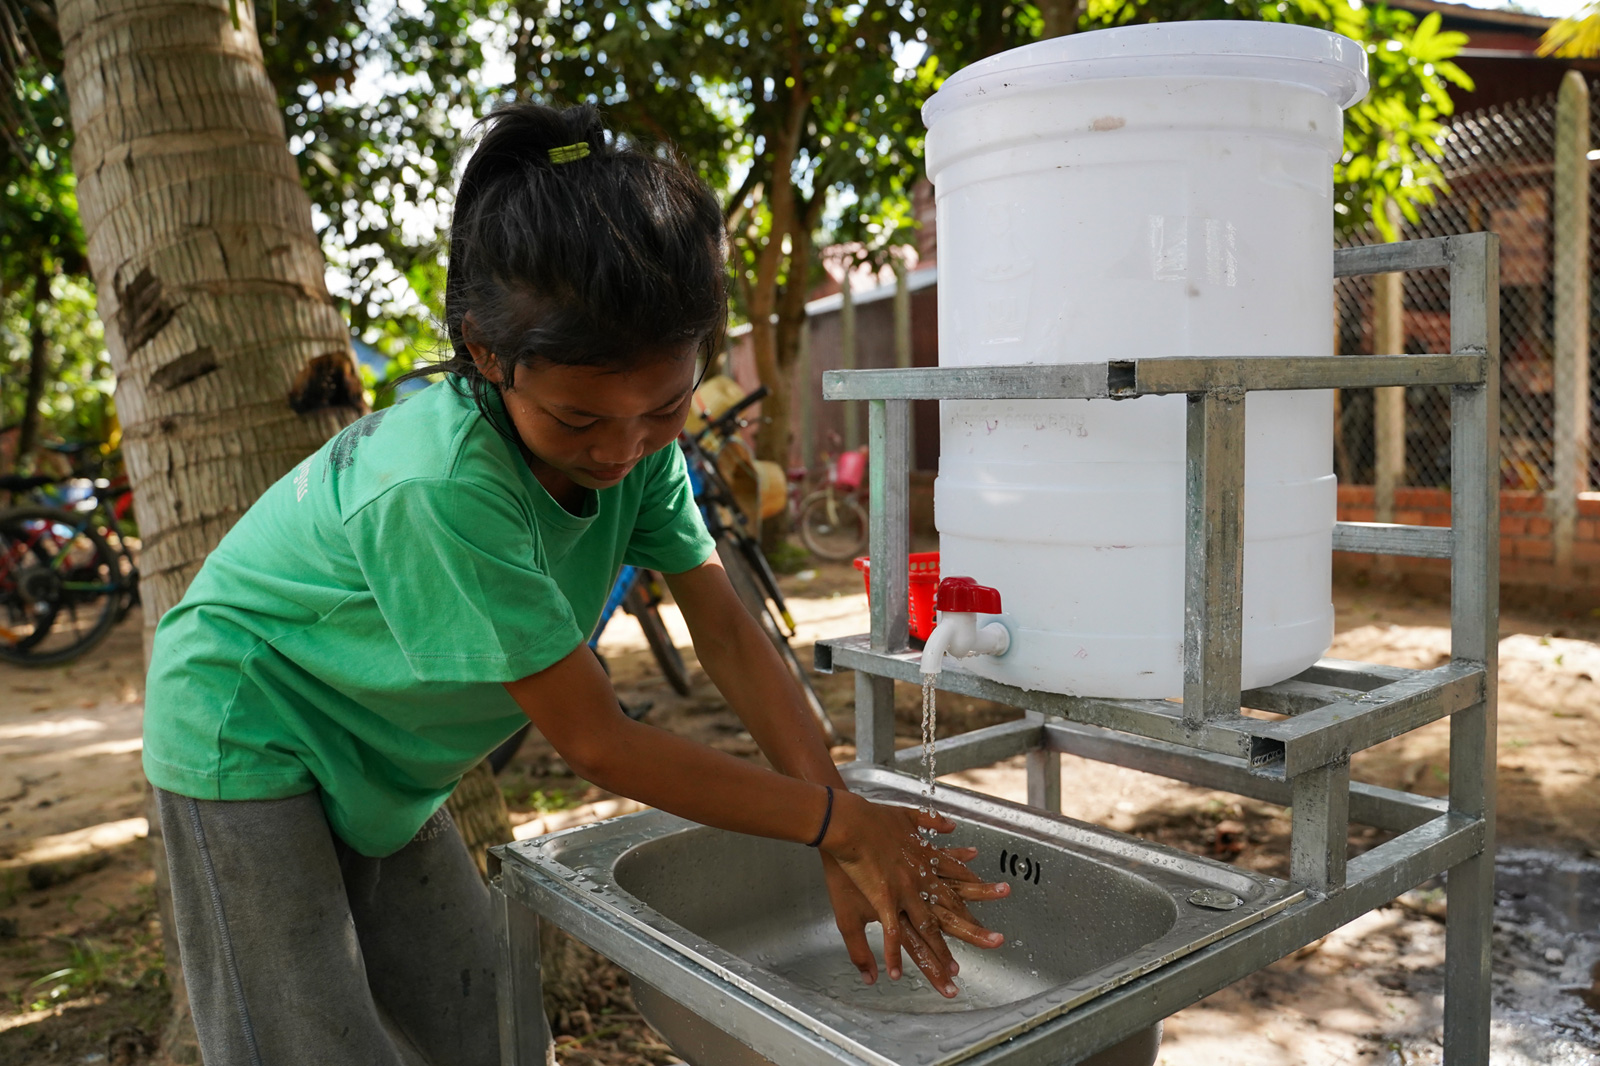 A donor gave a hand-washing station and volunteers taught students how to wash their hands properly at the Village Library in Areak Svay Village.